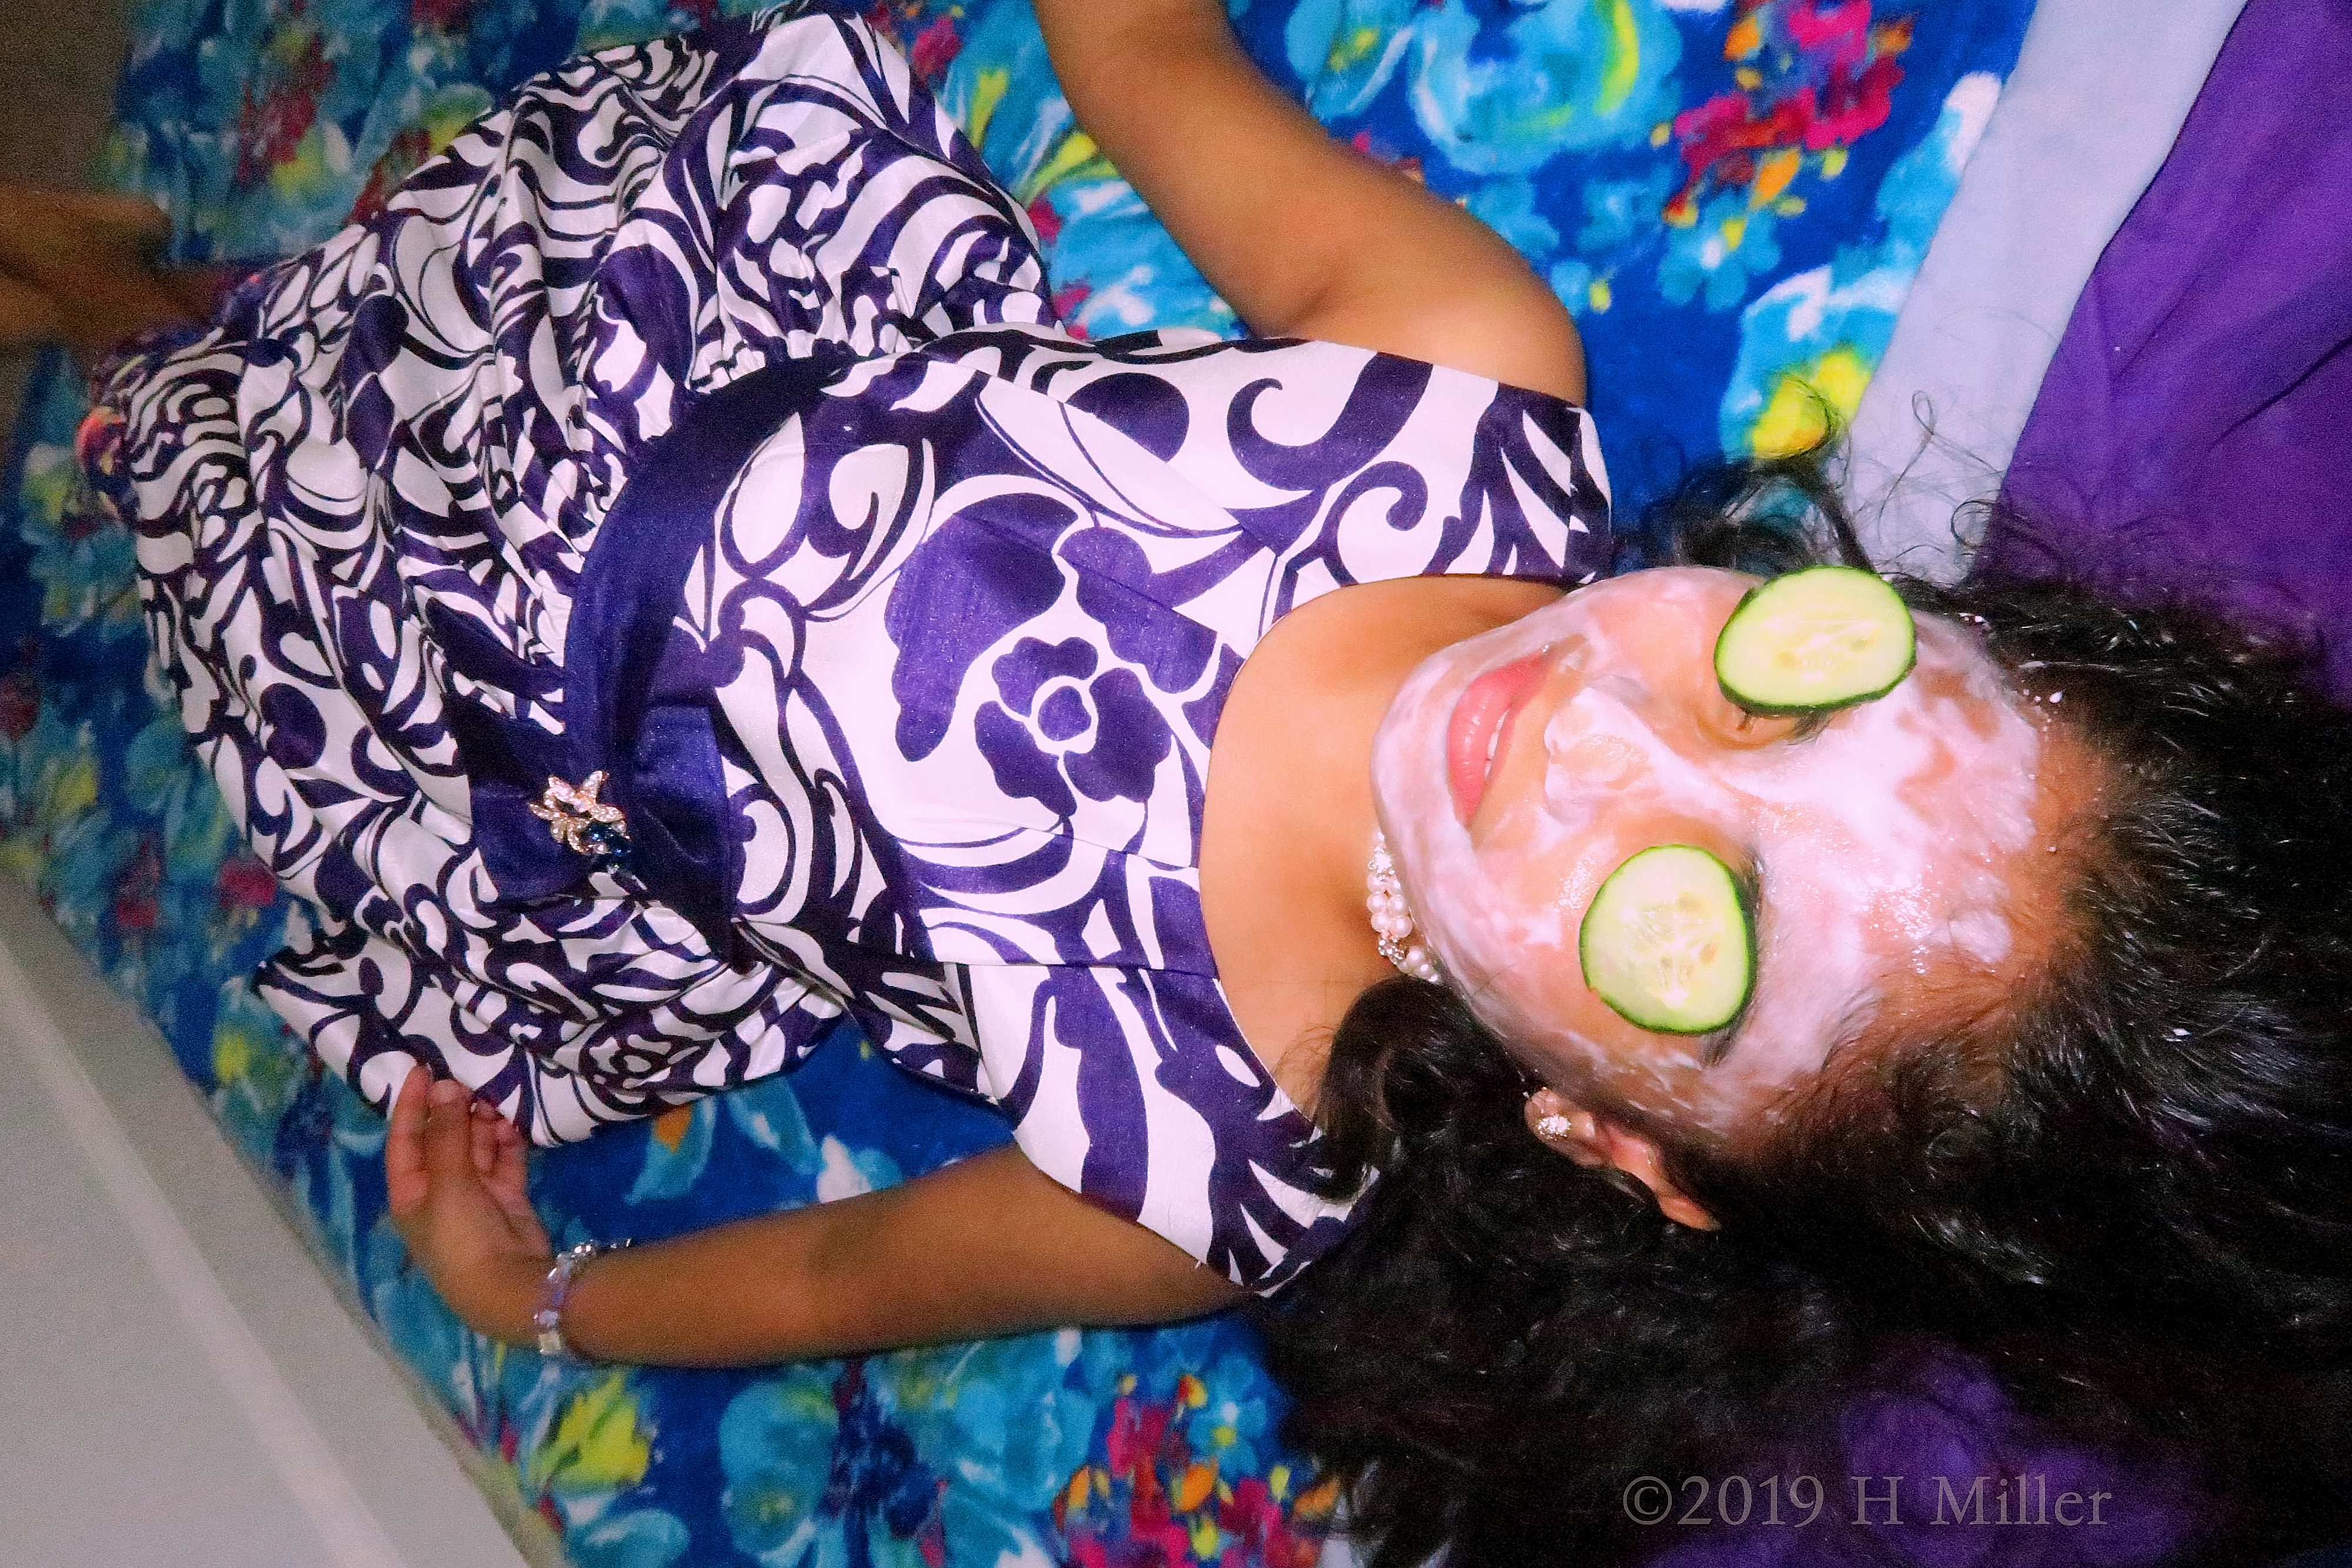 Cukes On Eyes! She Is Having A Relaxing Kids Facial At The Spa For Girls! 